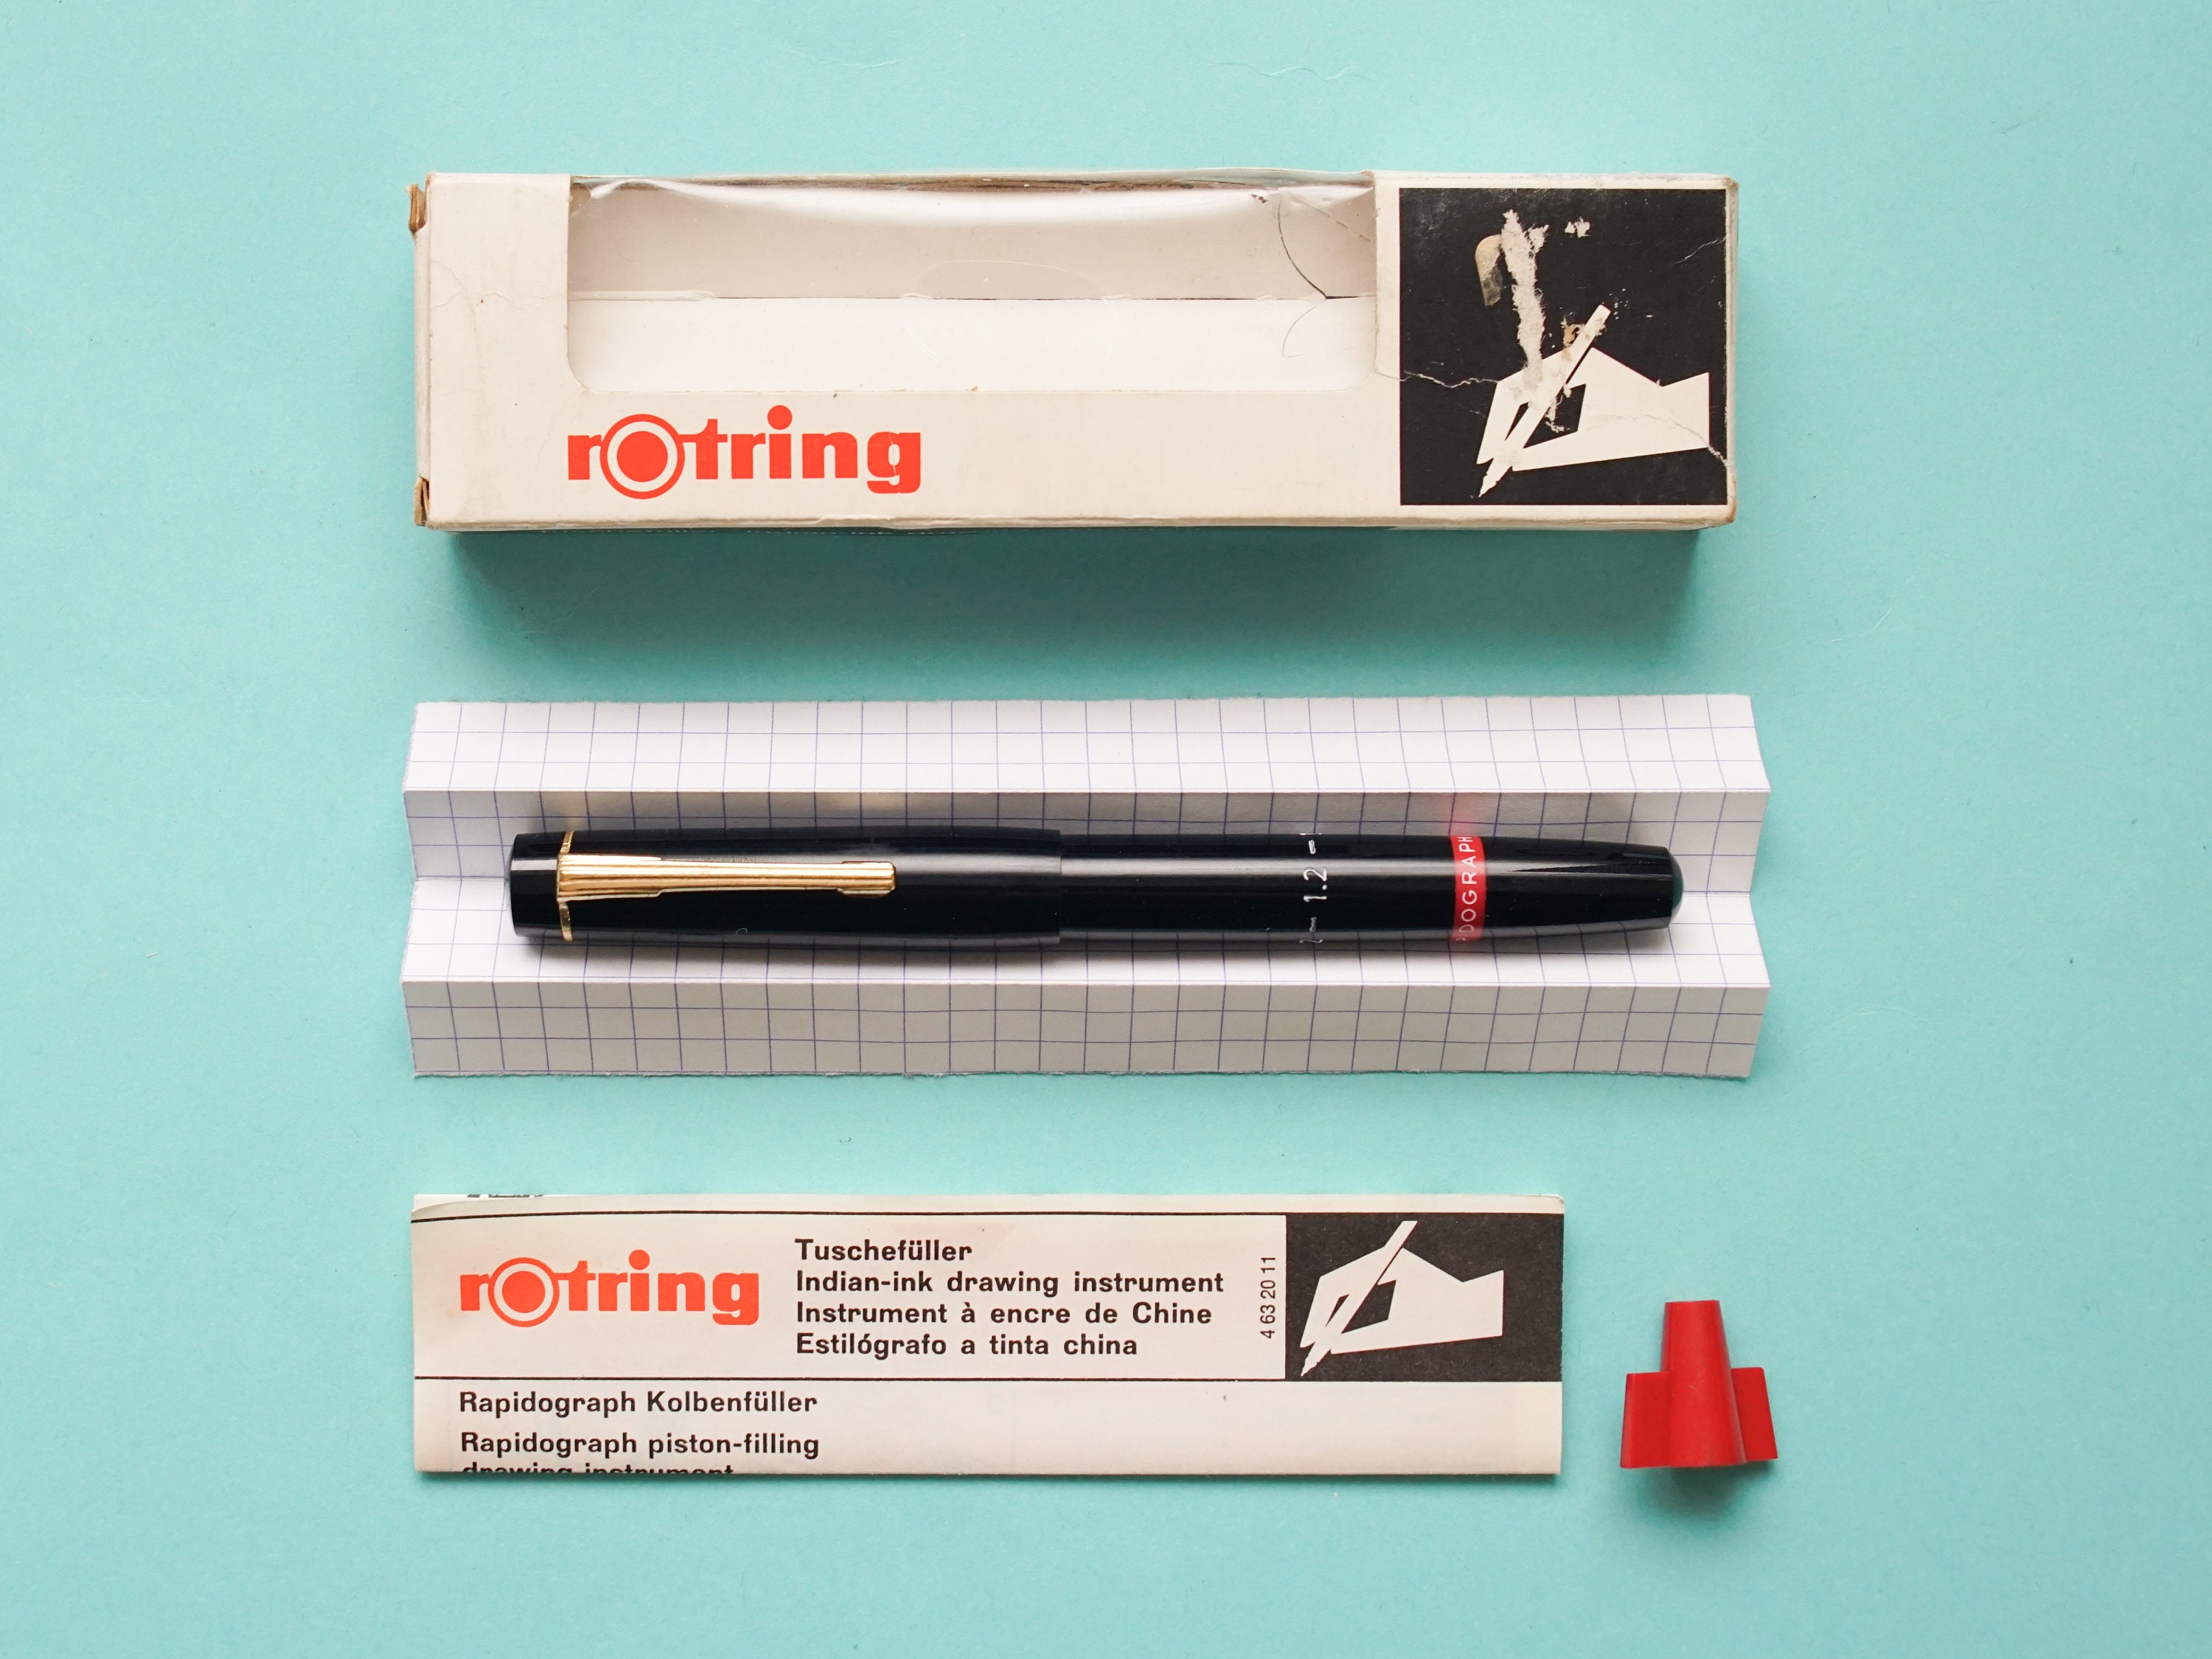  Rotring Rapidograph Pen - 0.1 mm - Black Ink